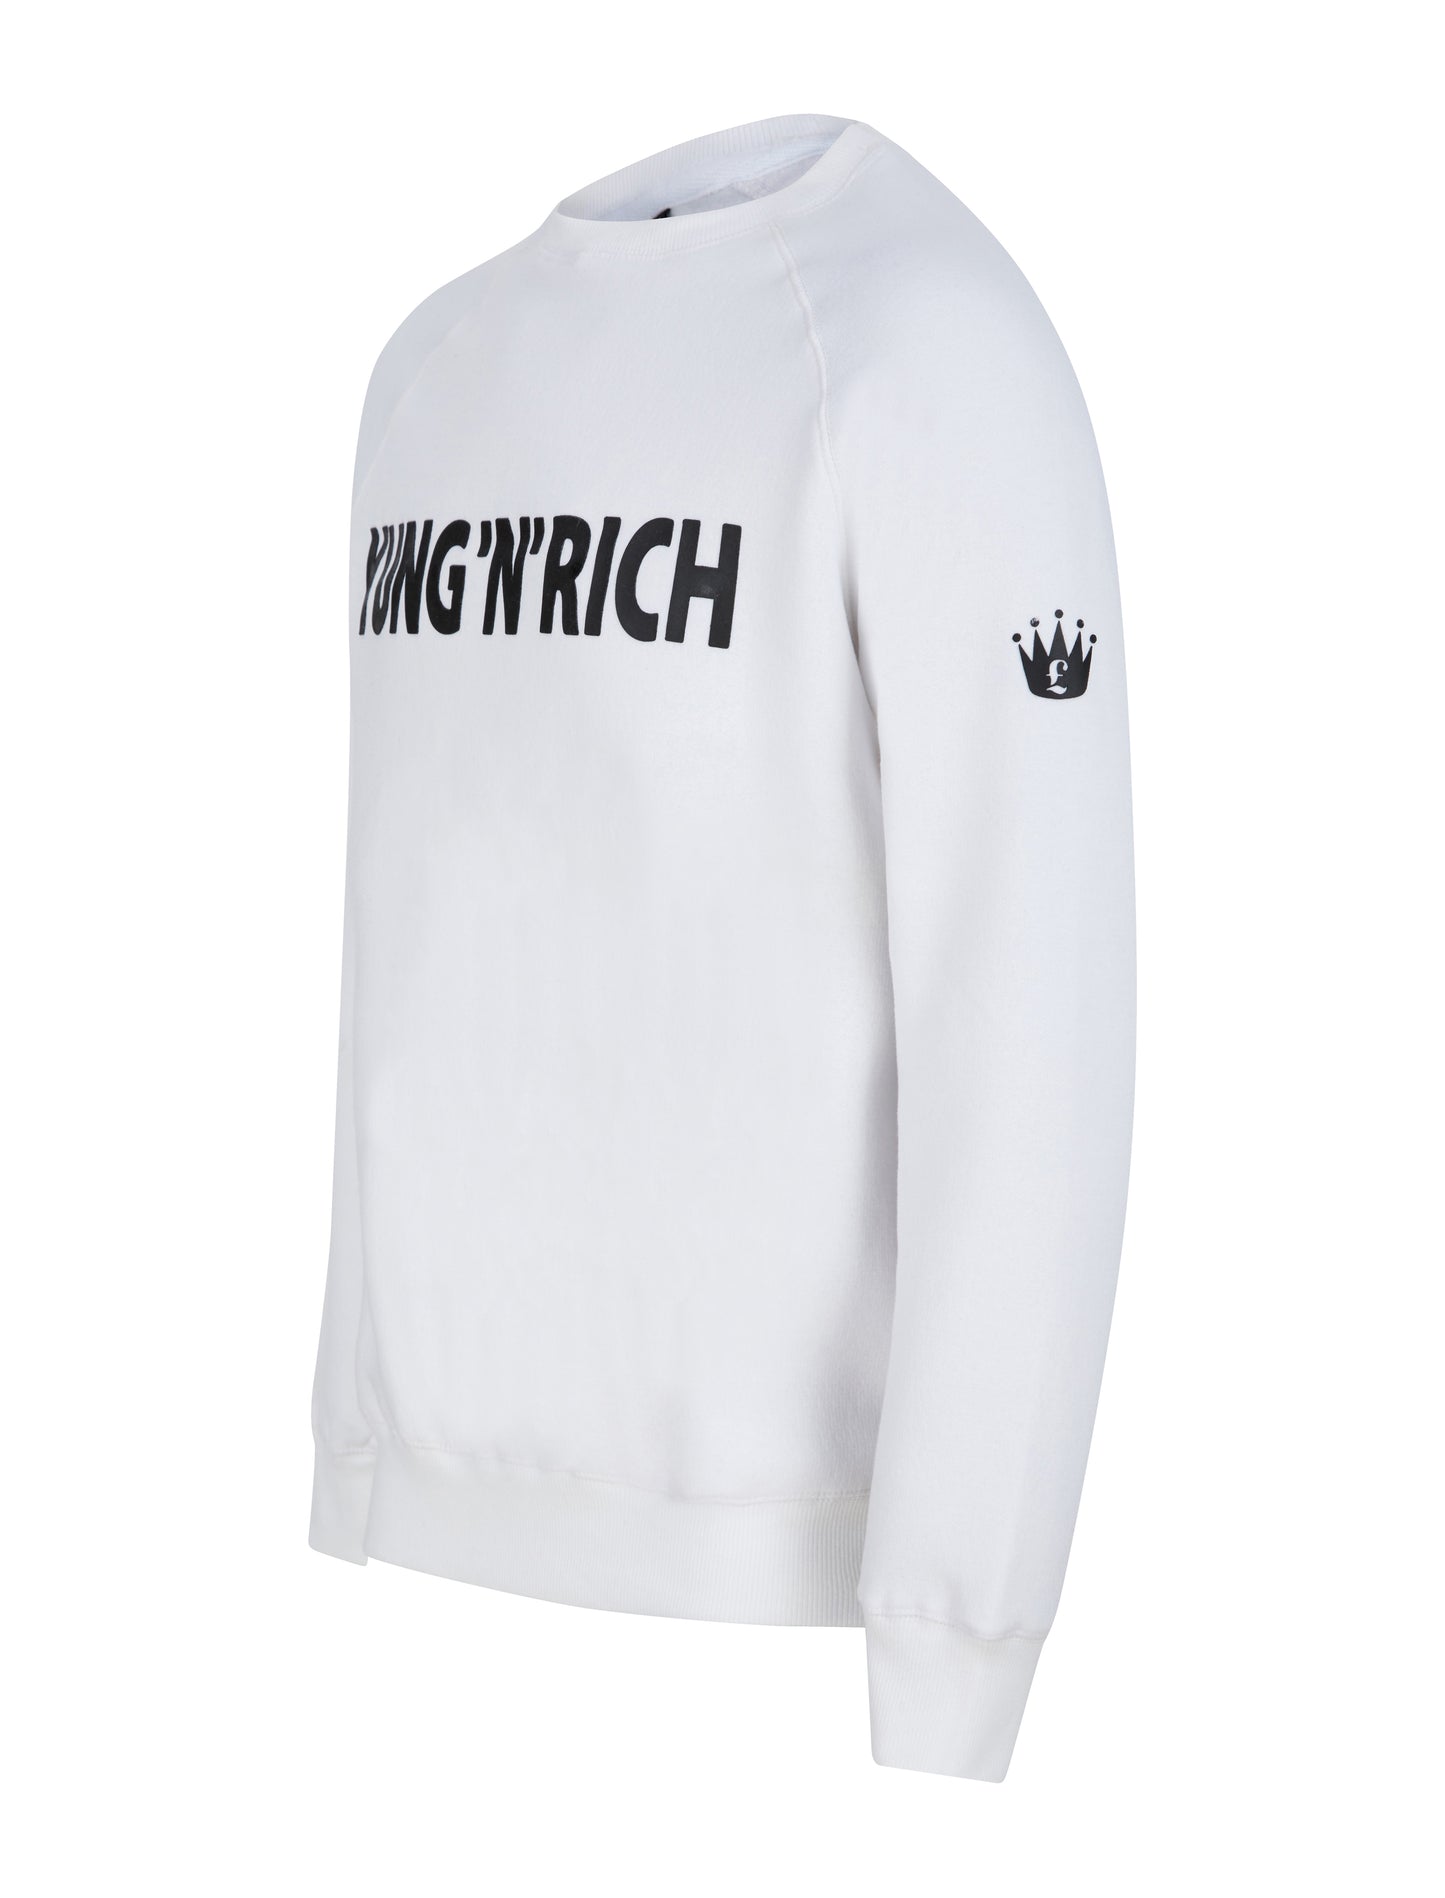 YUNG'N'RICH CREW NECK SWEATSHIRT - colour white with black rubber Yungnrich wording with black rubber Yungnrich crown